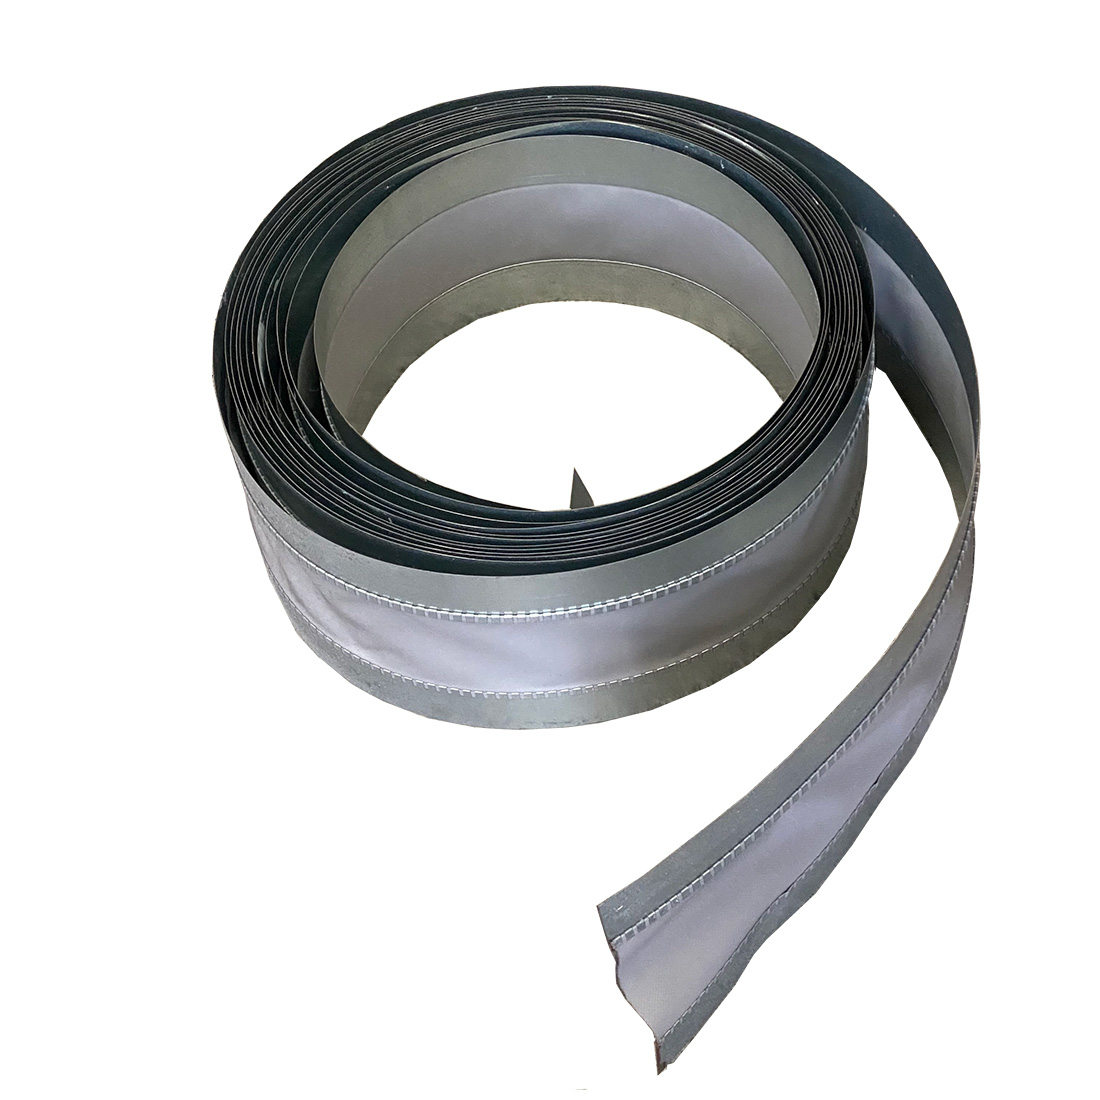 75mm - PVC coated Flexible duct Connector Band x 1 meter